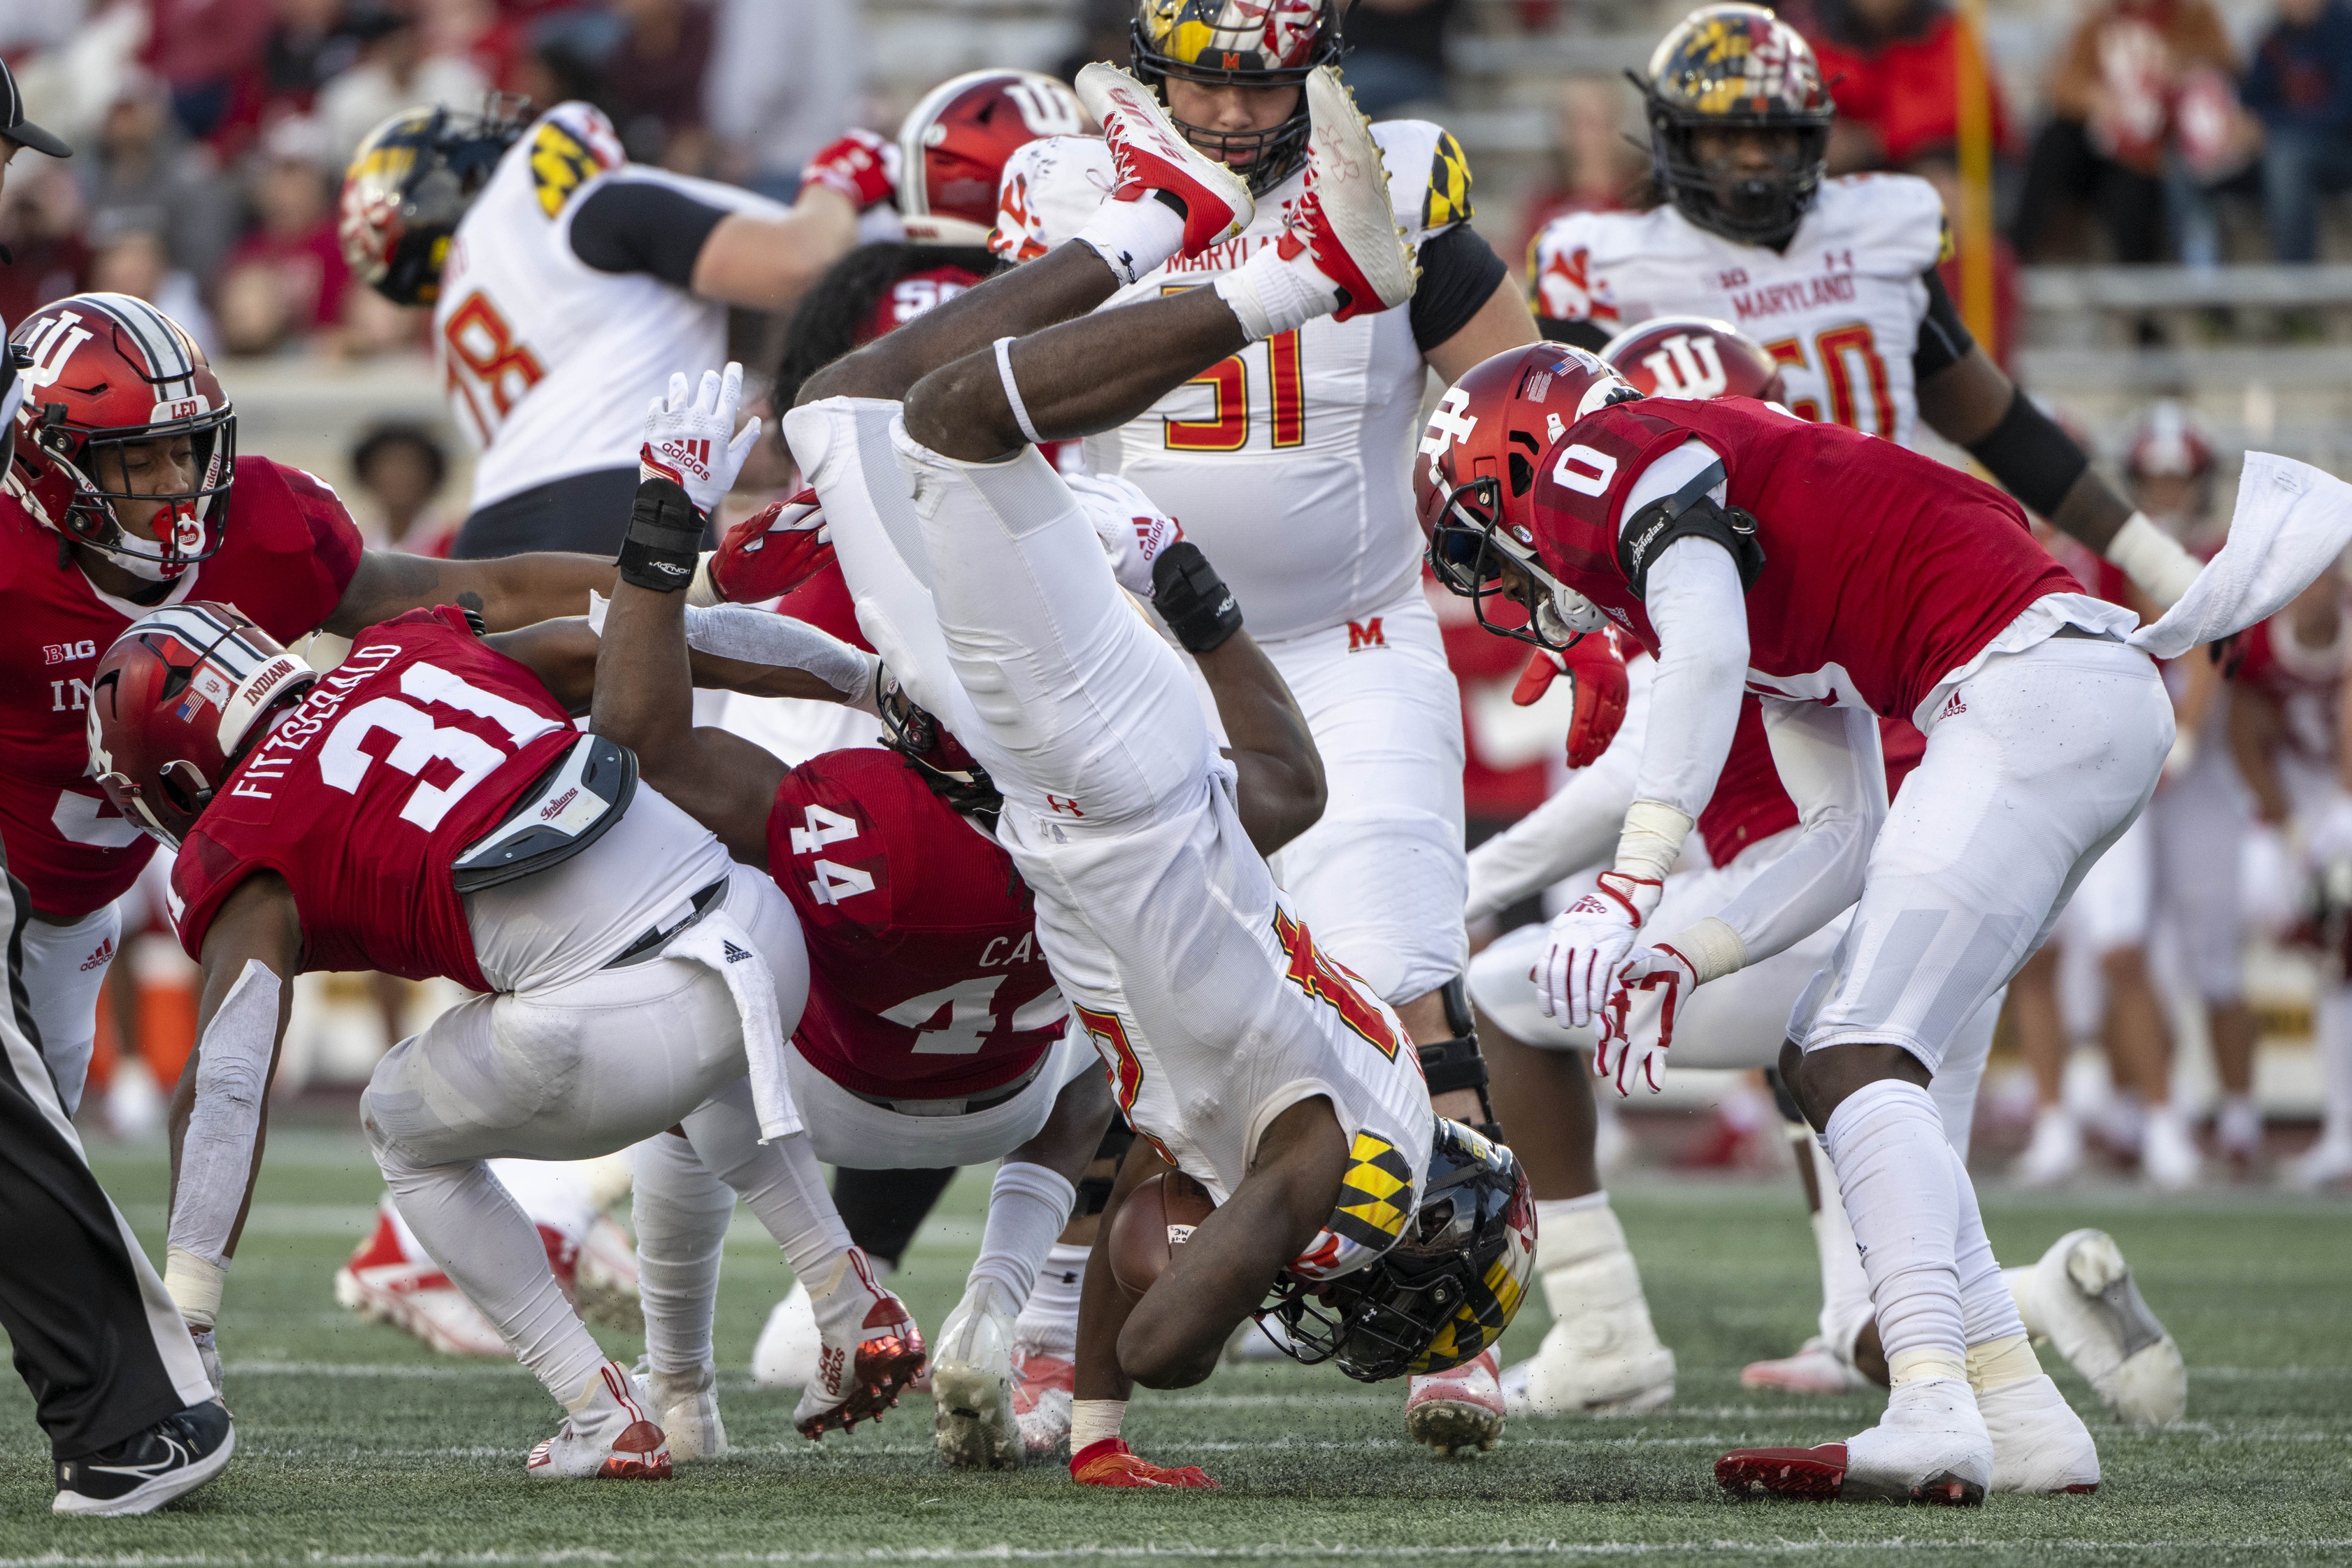 Oct 15, 2022; Bloomington, Indiana, USA; Maryland Terrapins running back Roman Hemby (24) is flipped by Indiana Hoosiers linebacker Aaron Casey (44) during the second half at Memorial Stadium.